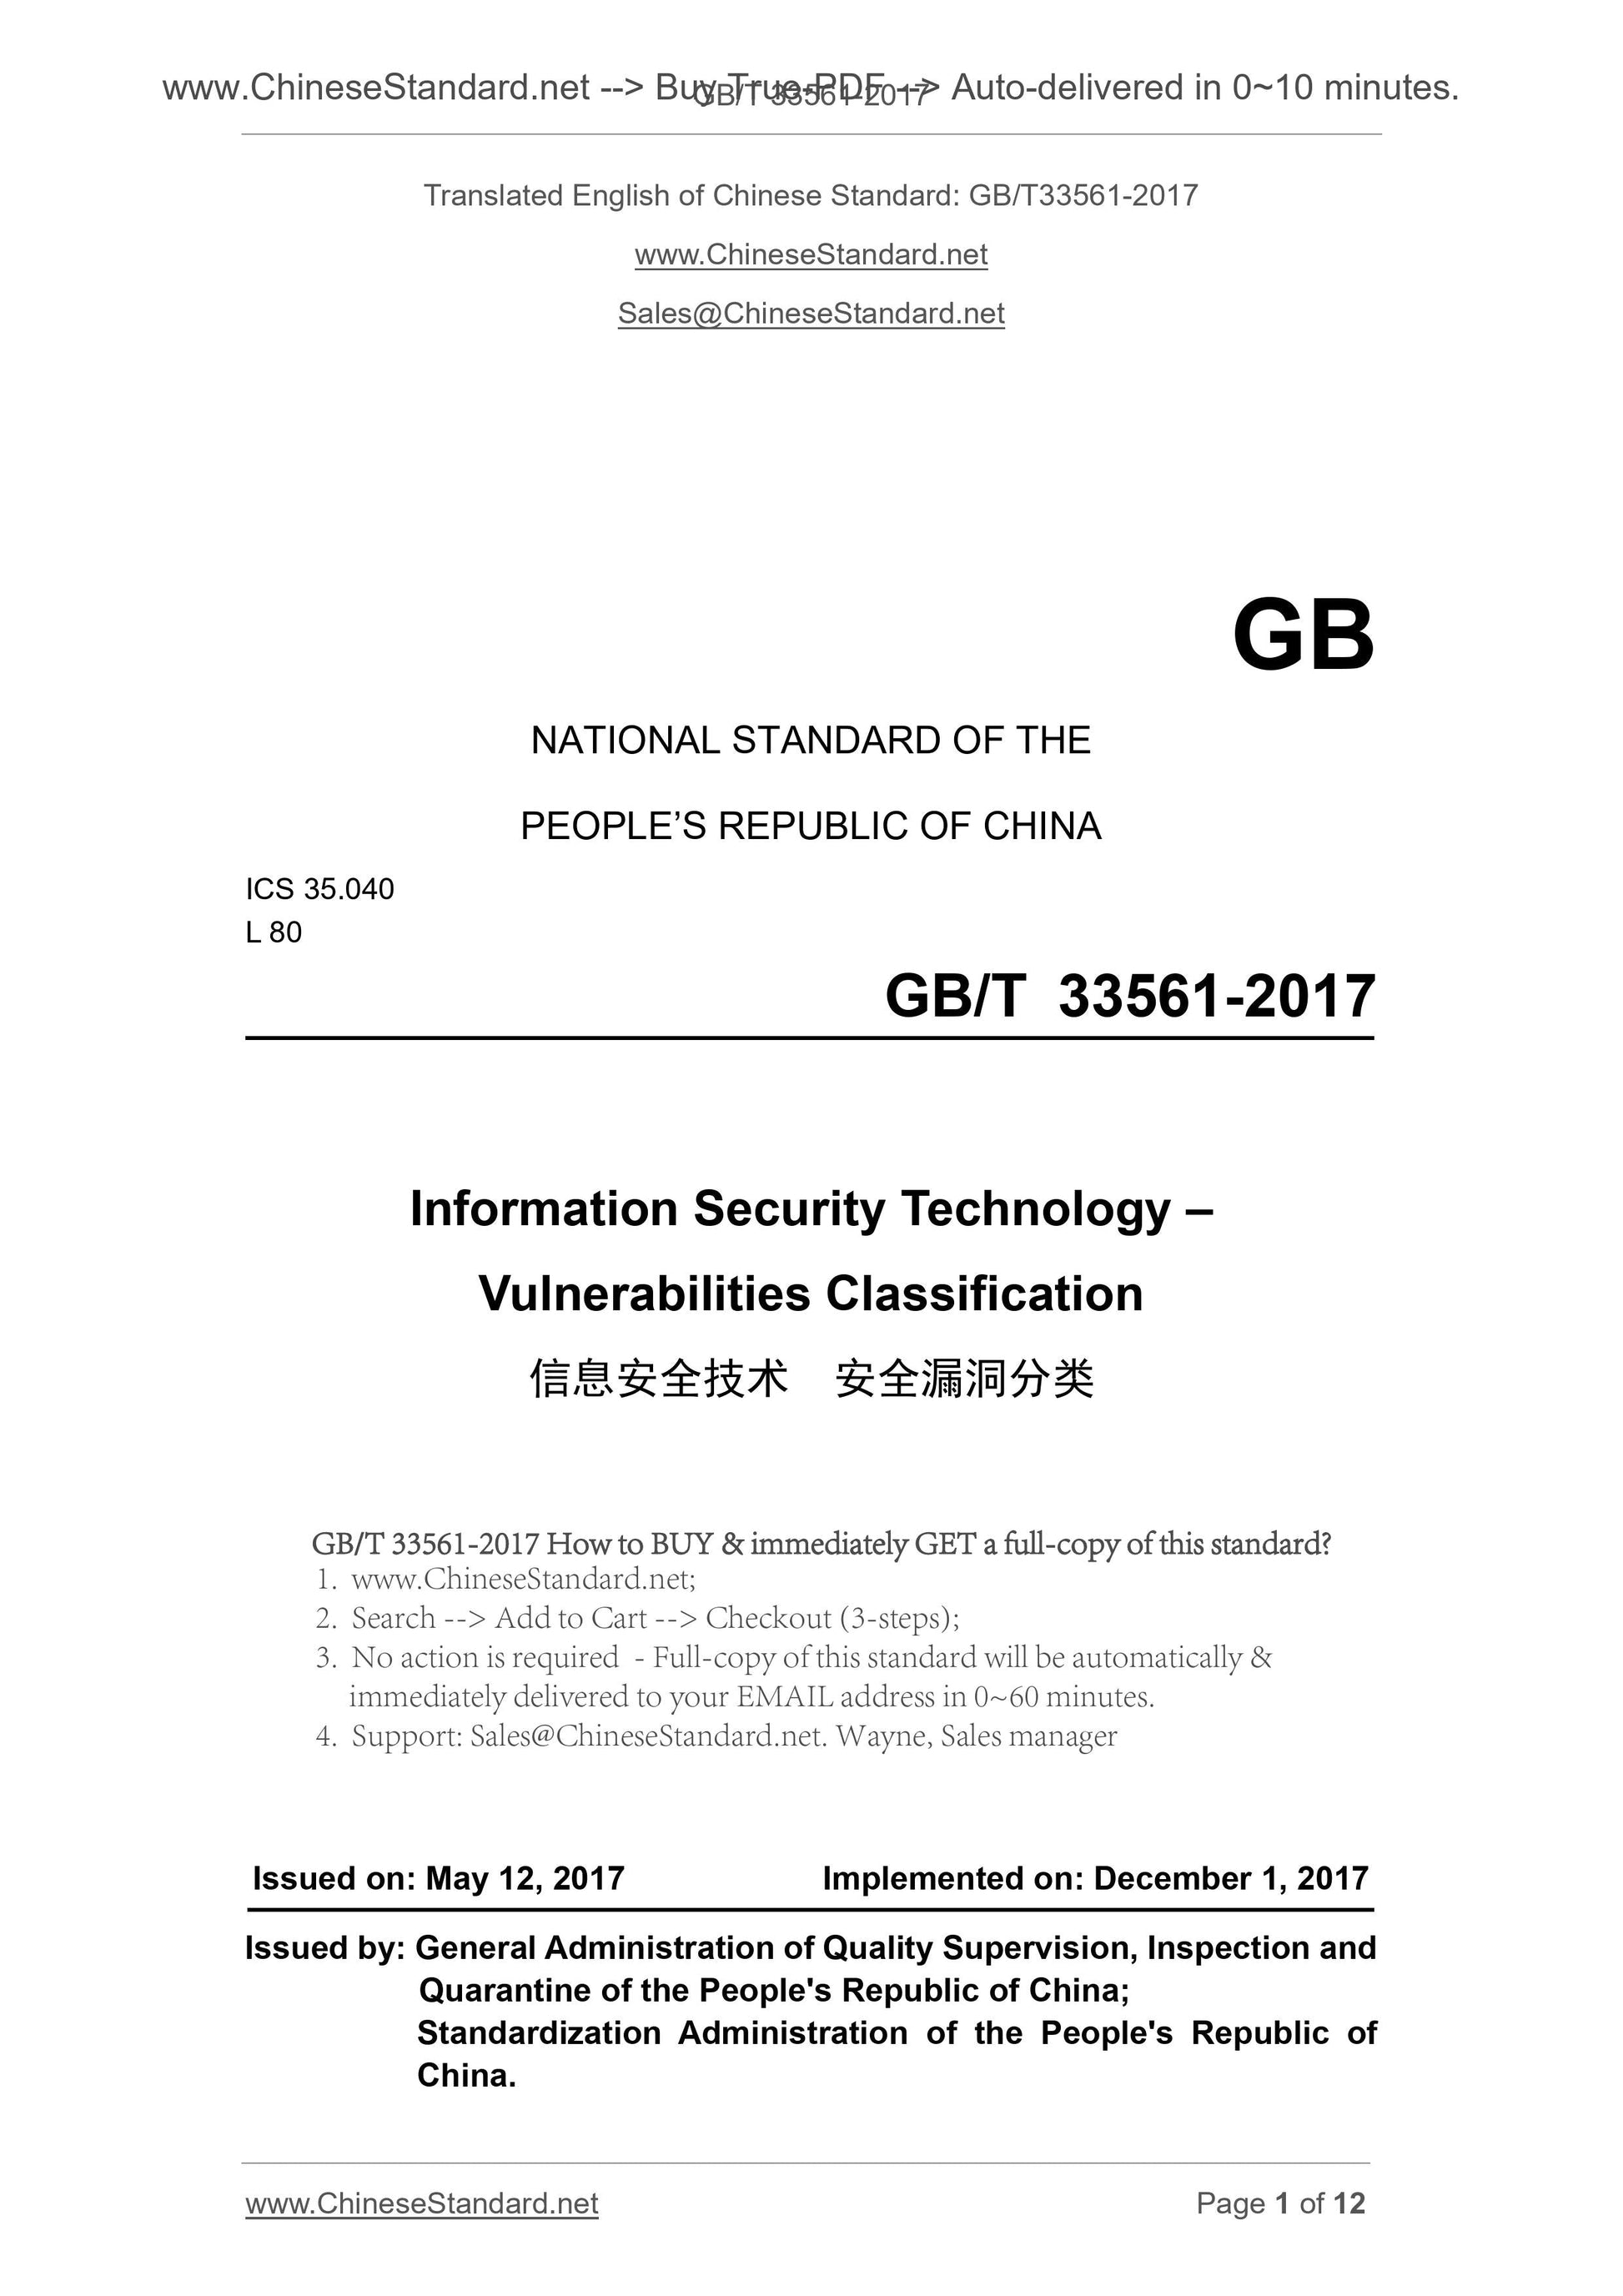 GB/T 33561-2017 Page 1